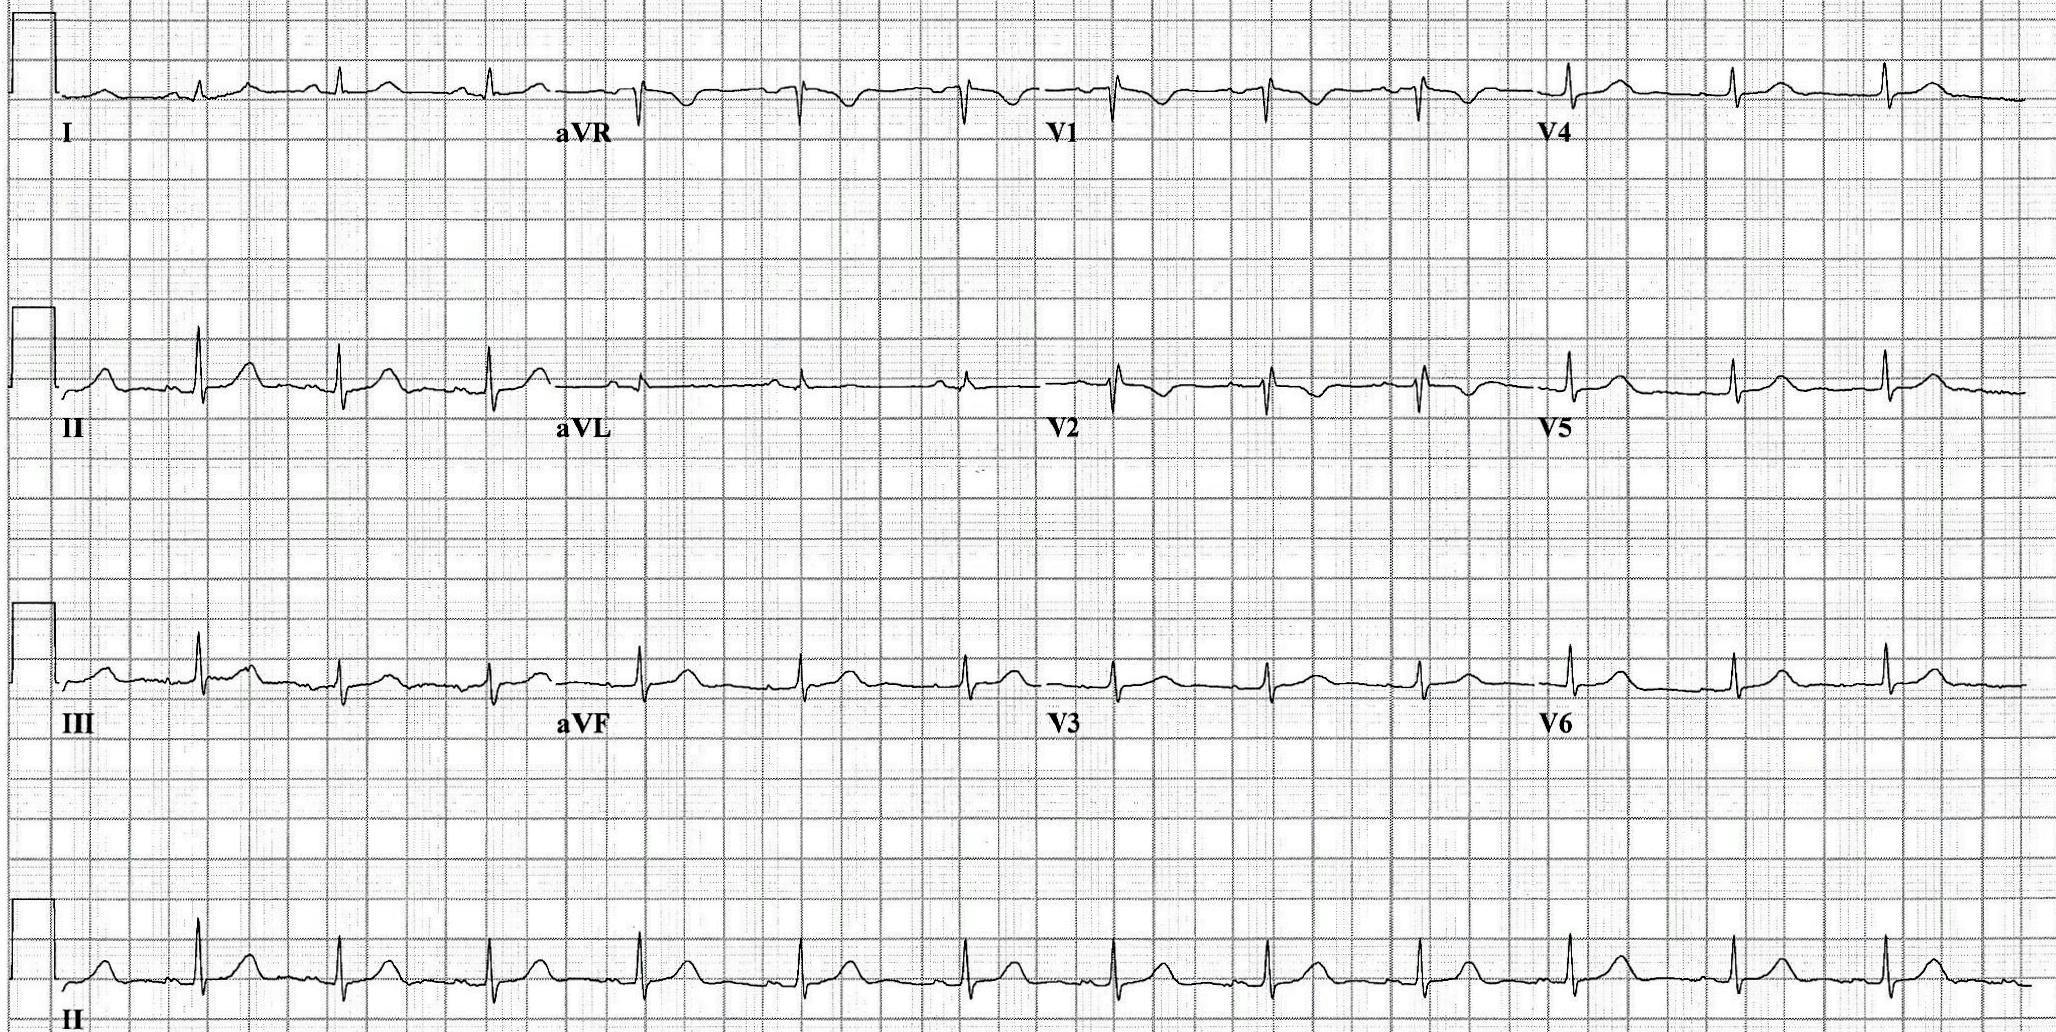 Case Report: Young Patient with Chest Pain